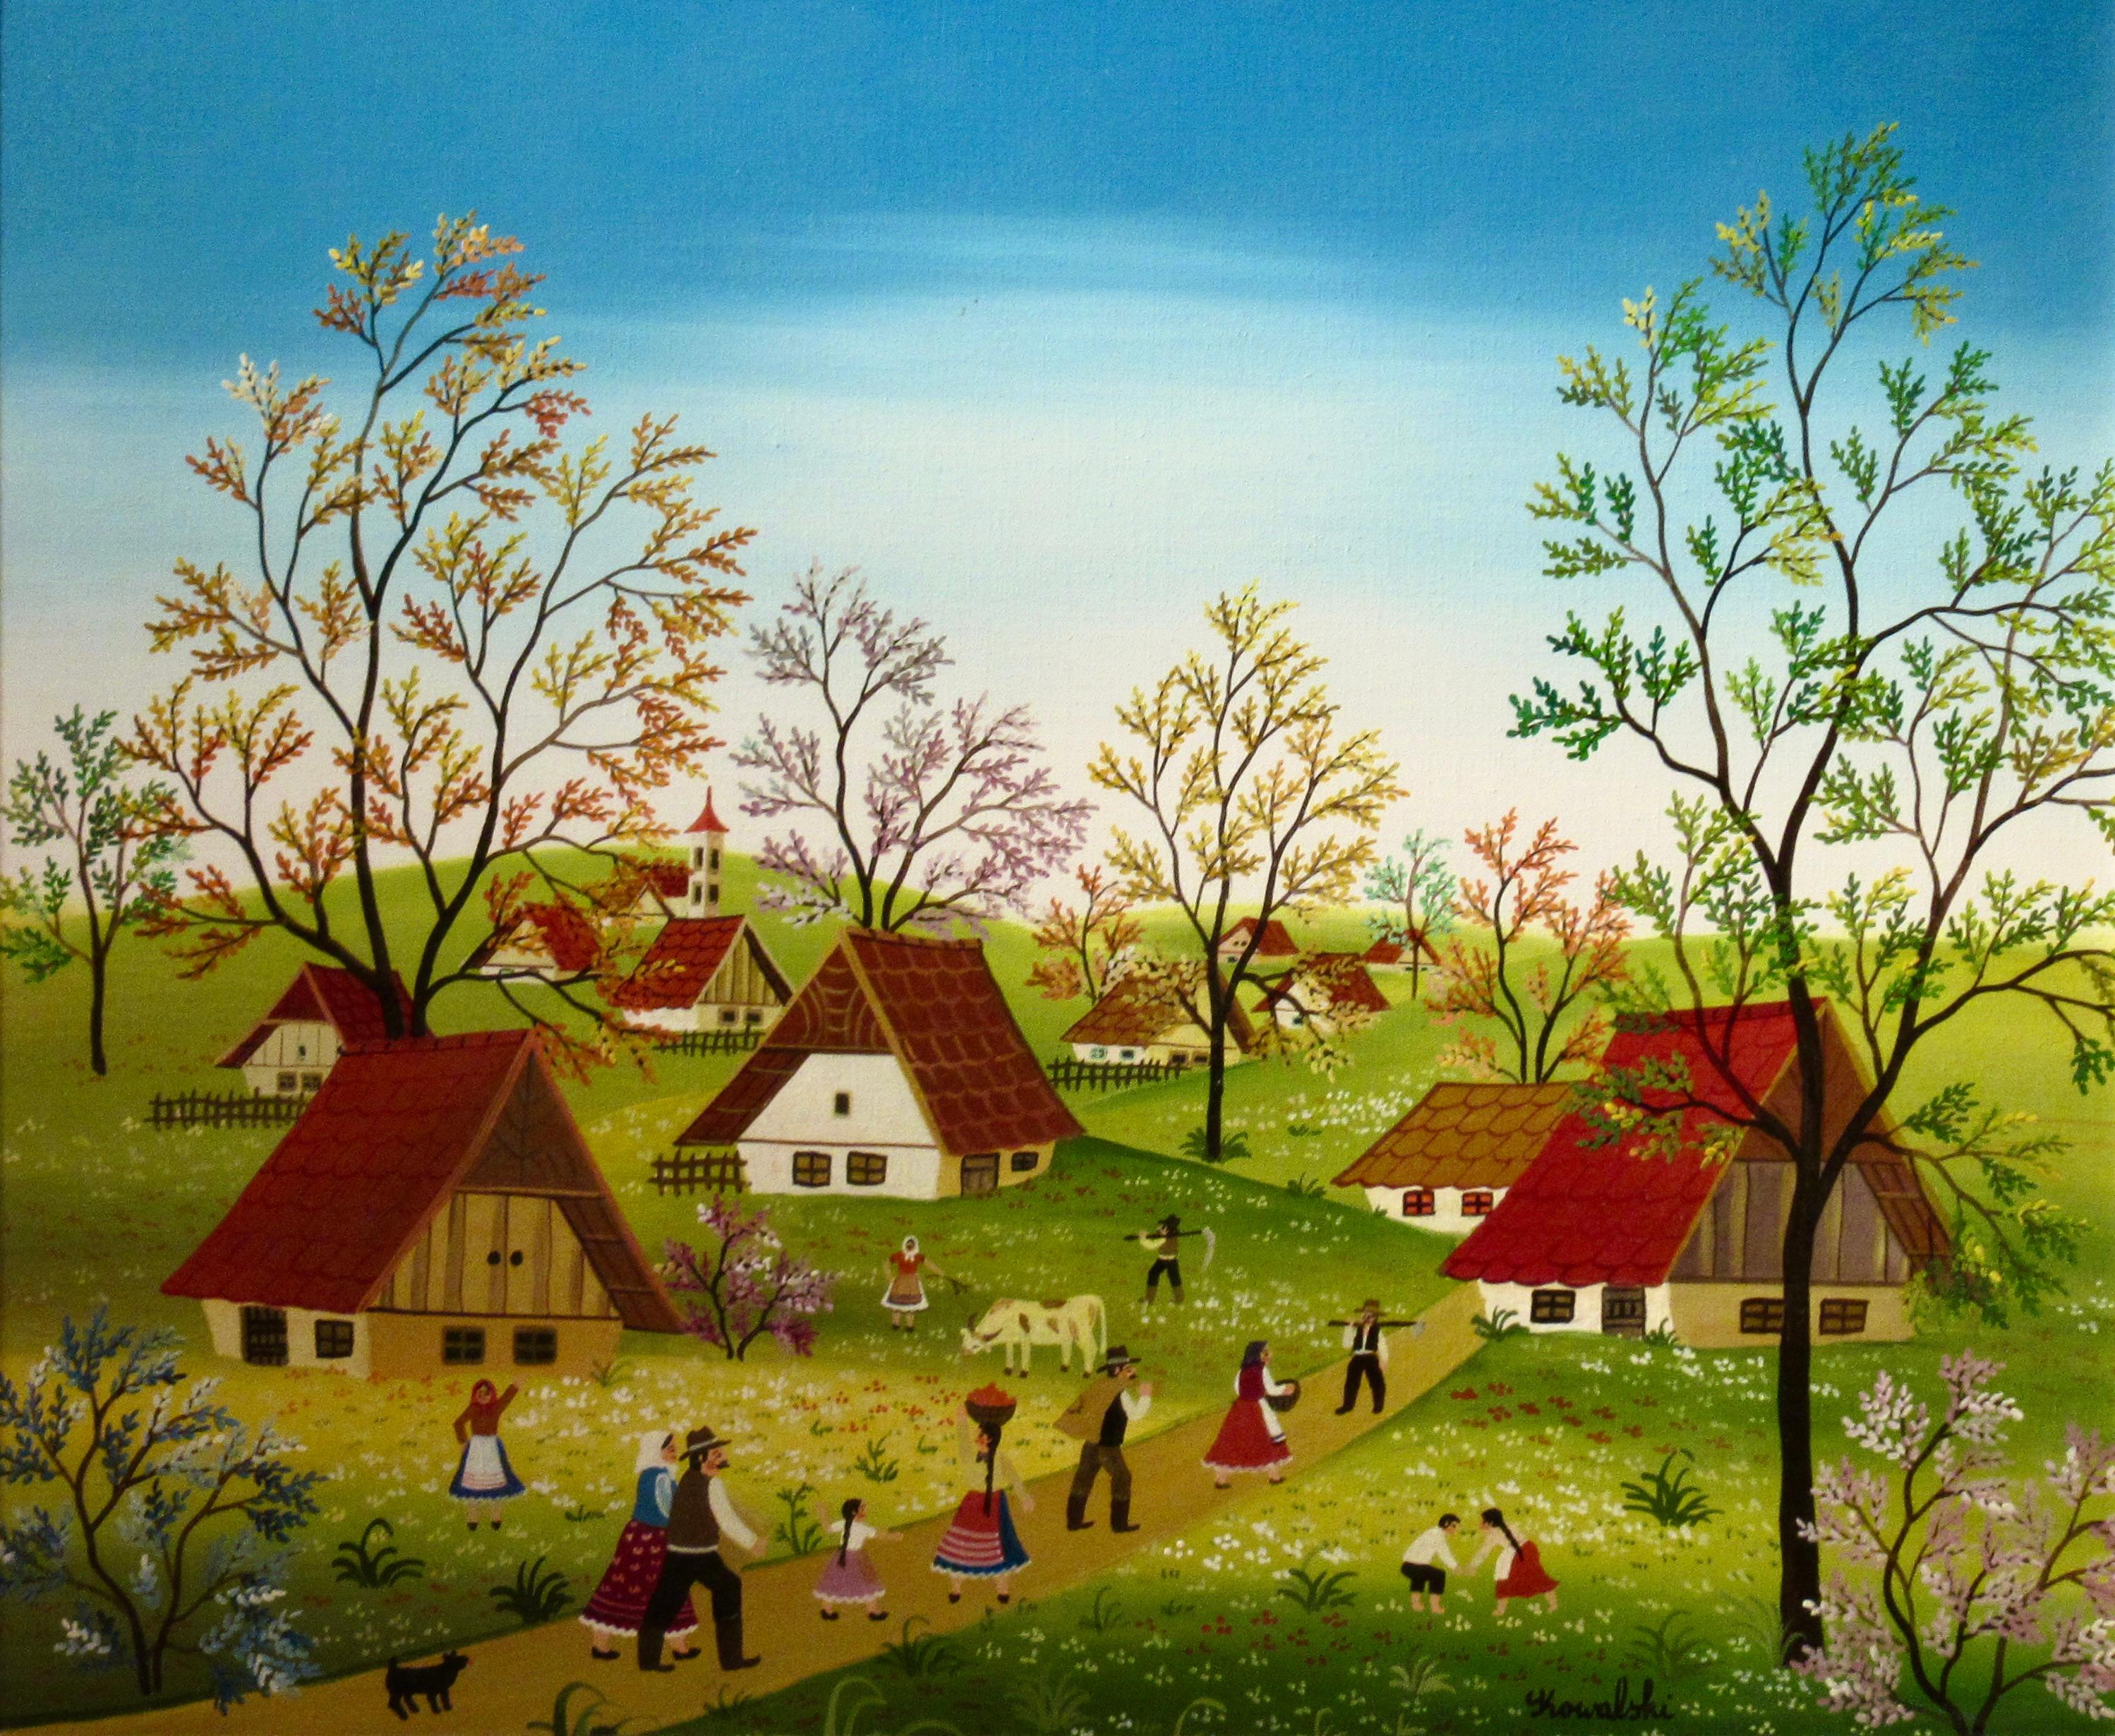 People of the Village - Painting by Anton Kowalski